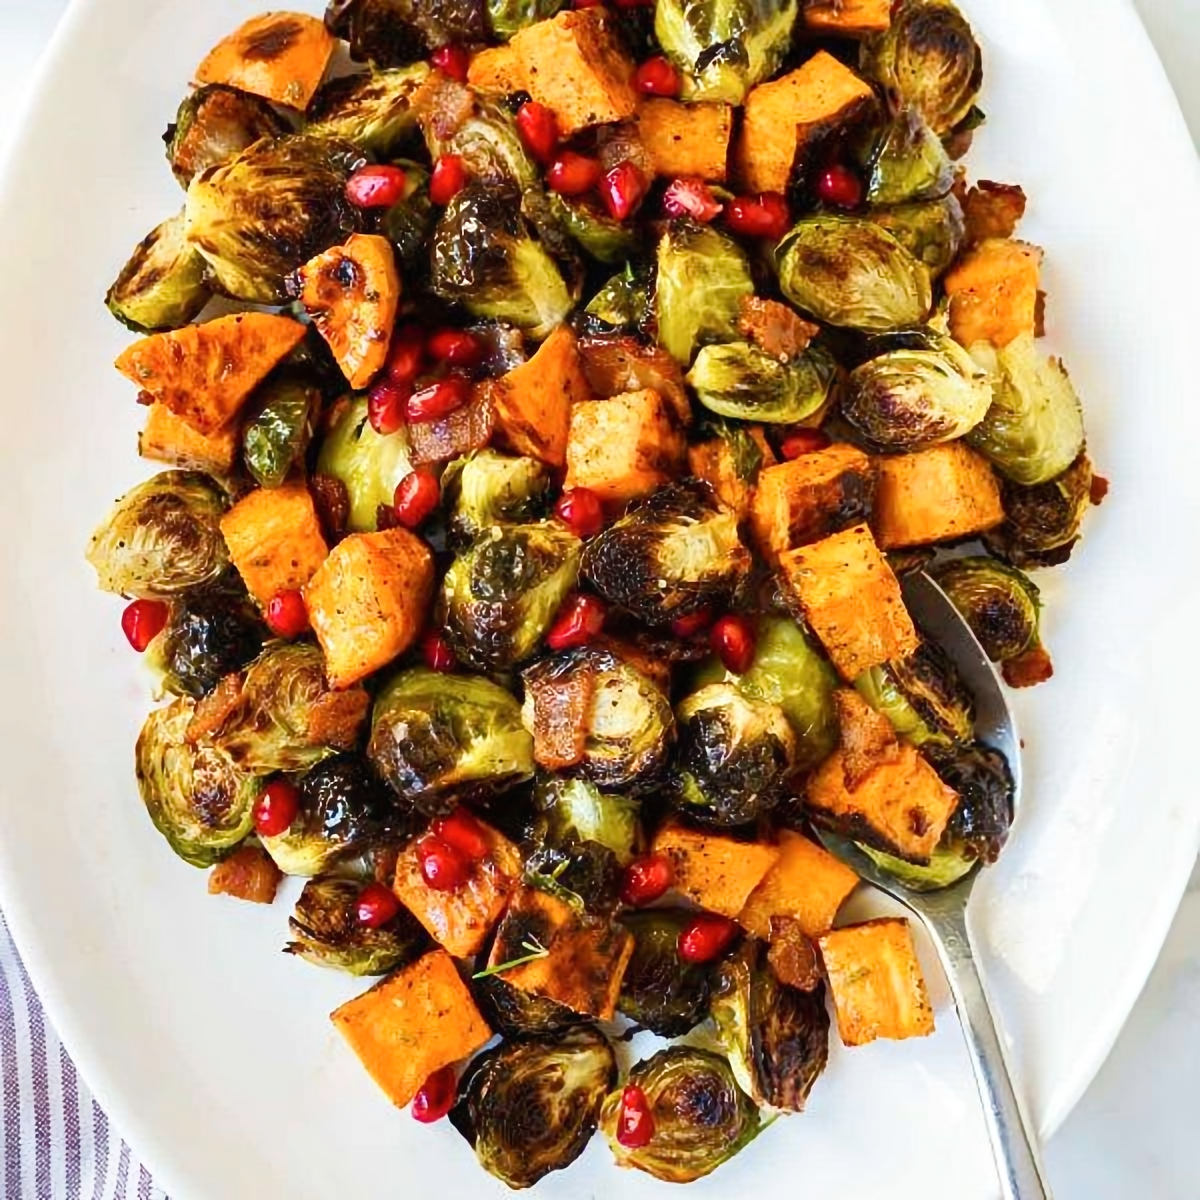 5. Oven-Roasted Brussels Sprouts and Sweet Potatoes - holiday brussel sprout recipes